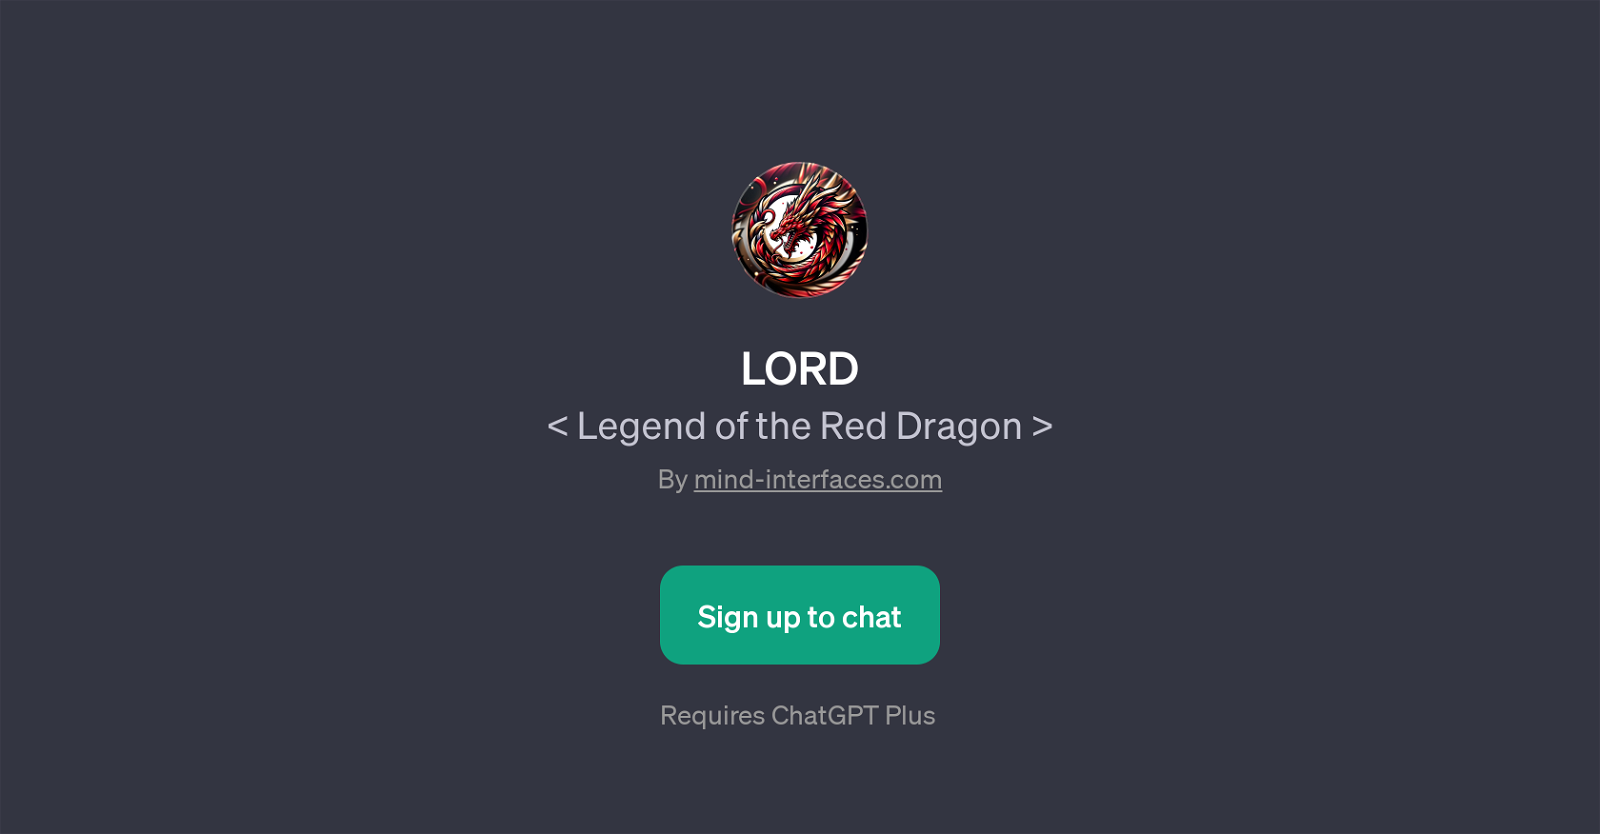 LORD website